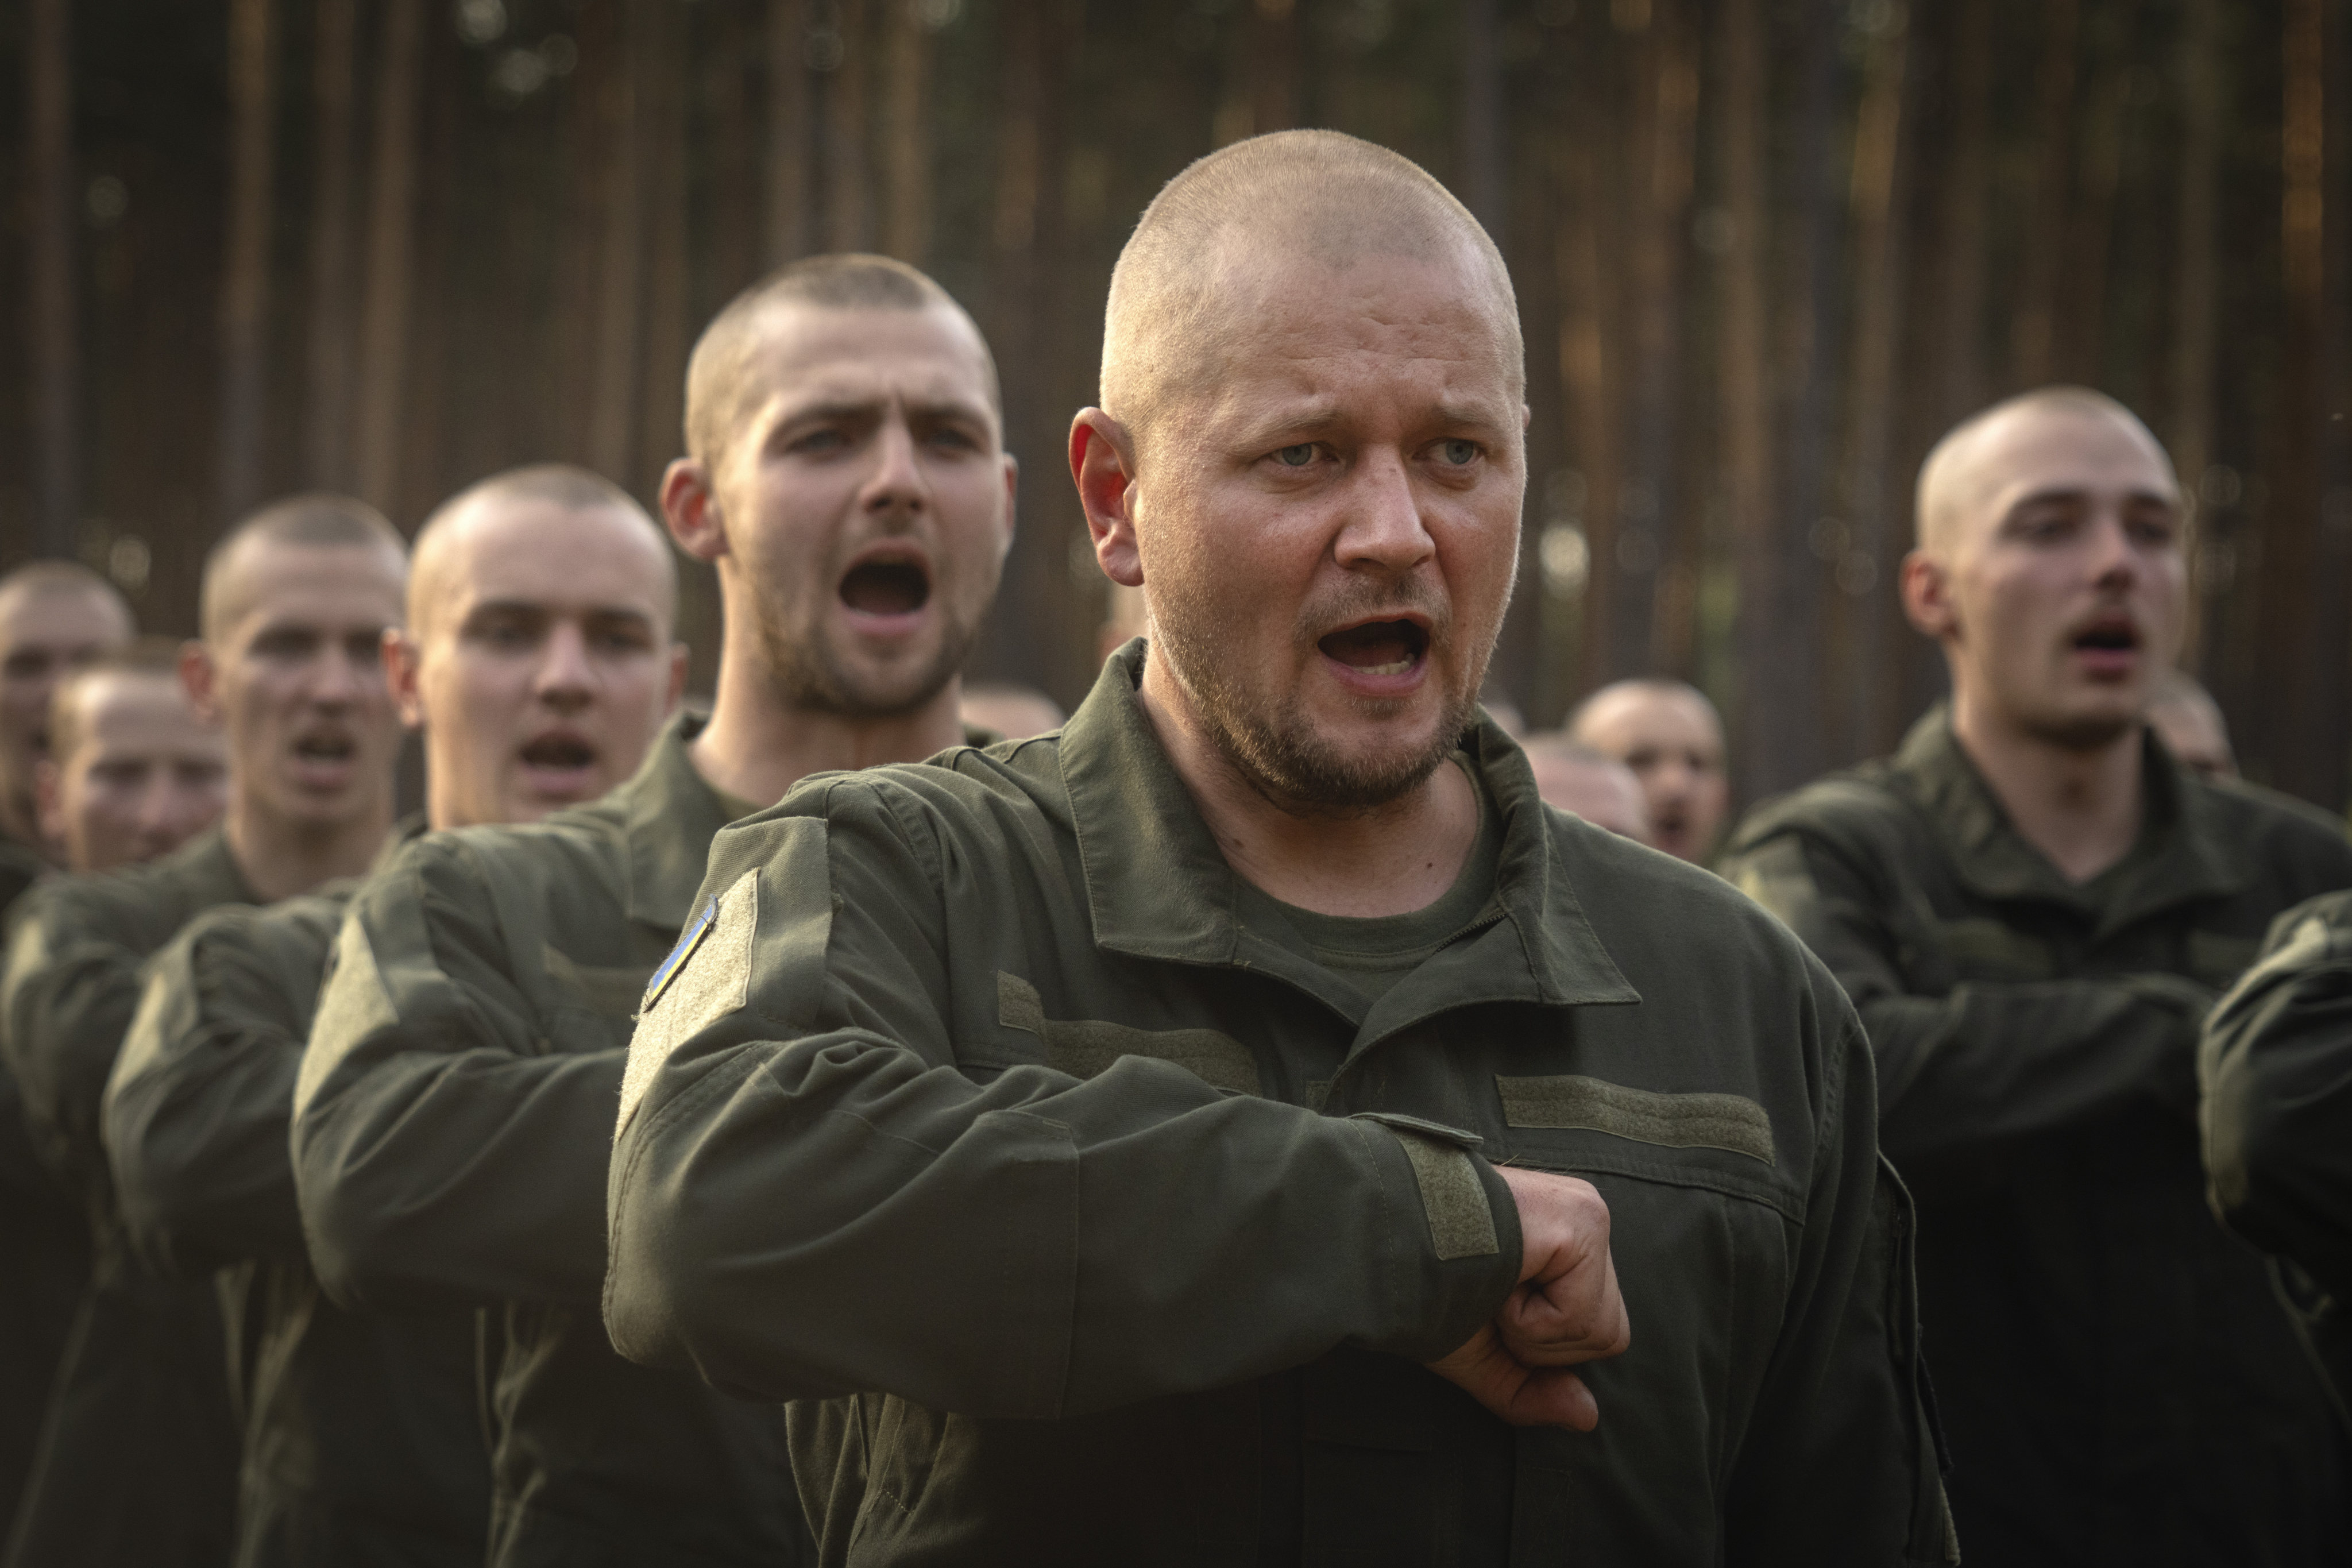 Ukraine’s parliament passed a law on Thursday that will govern how the country recruits new conscripts. Photo: AP